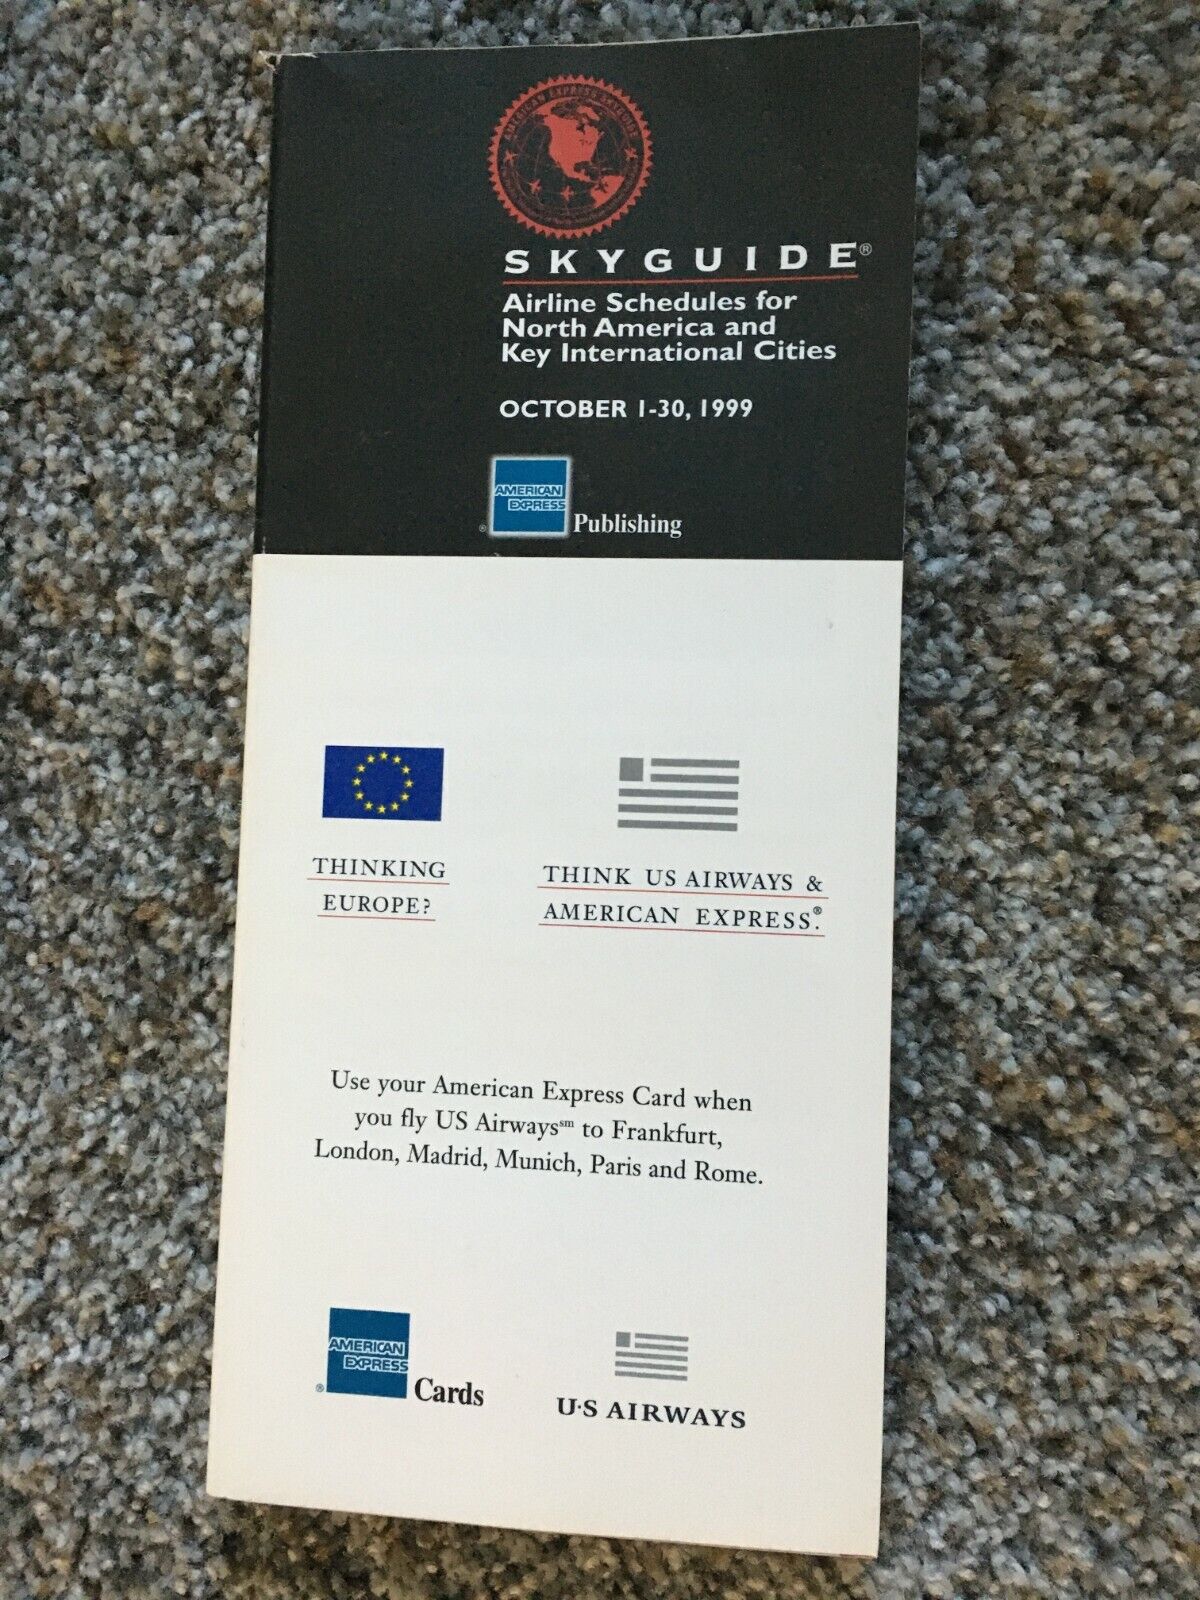 SkyGuide--Amex version of OAG Official Airline Guide North America October 1999